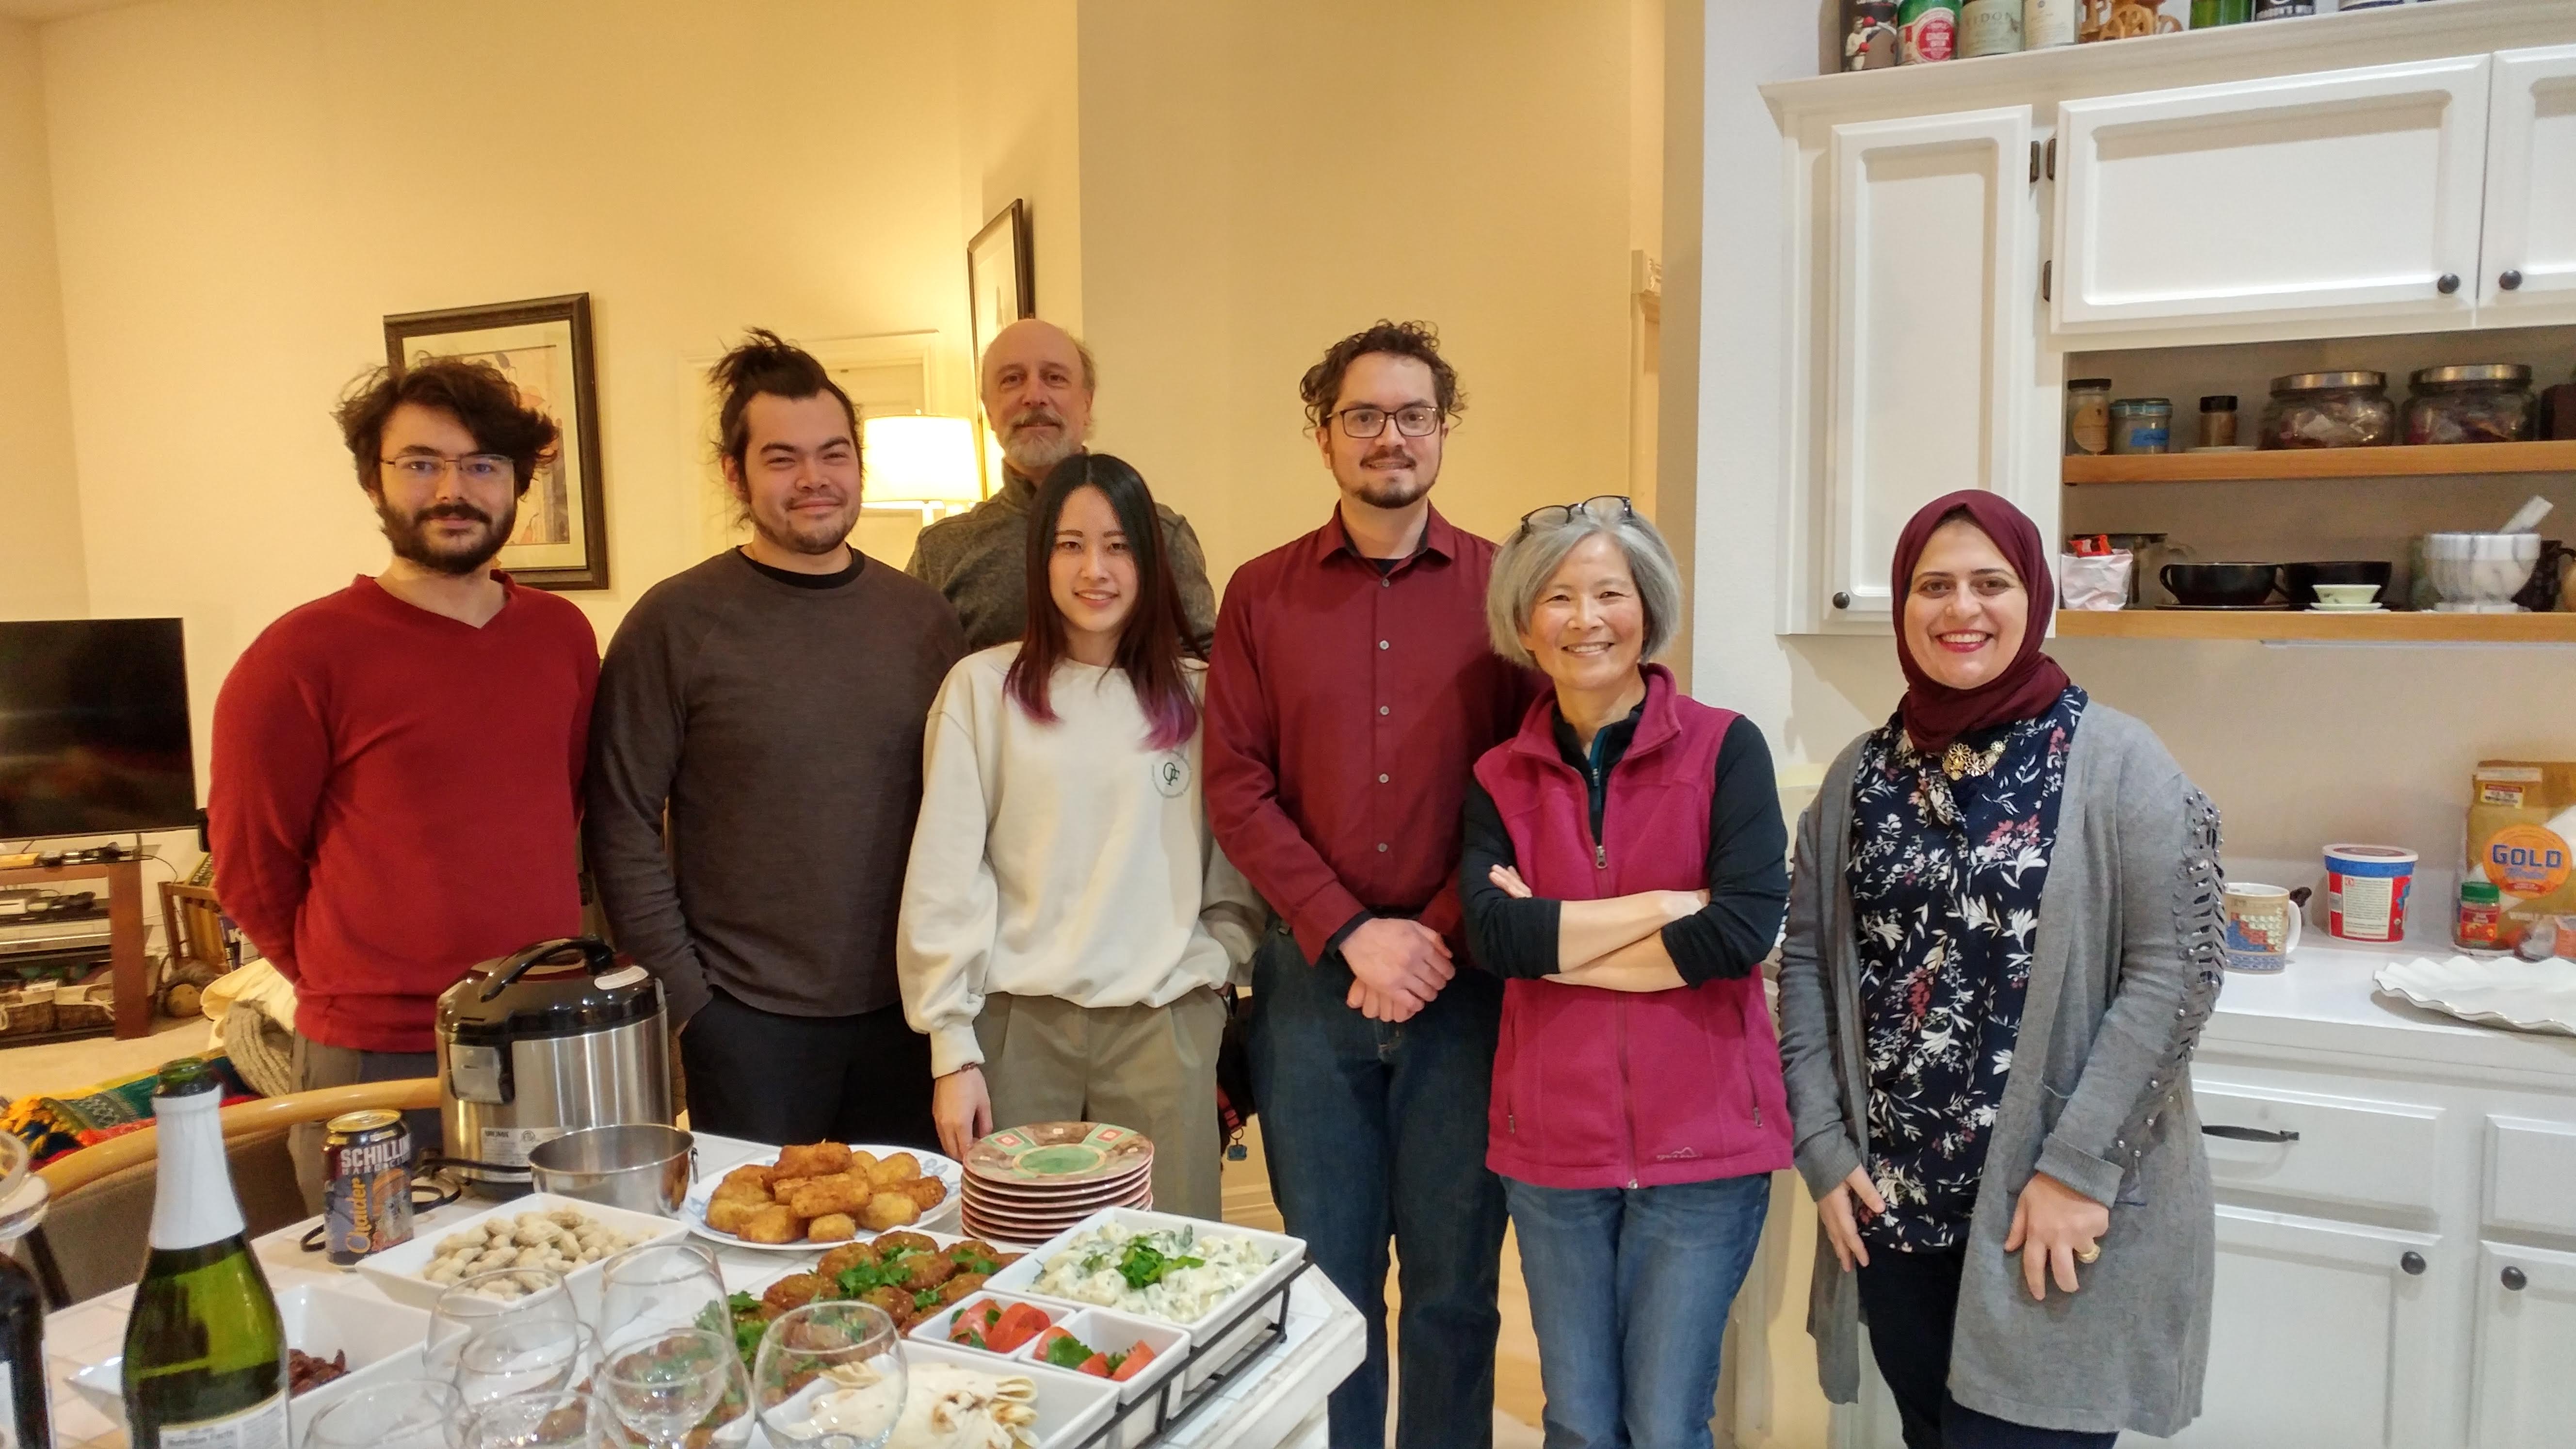 Members of Shyng lab gathered in a kitchen